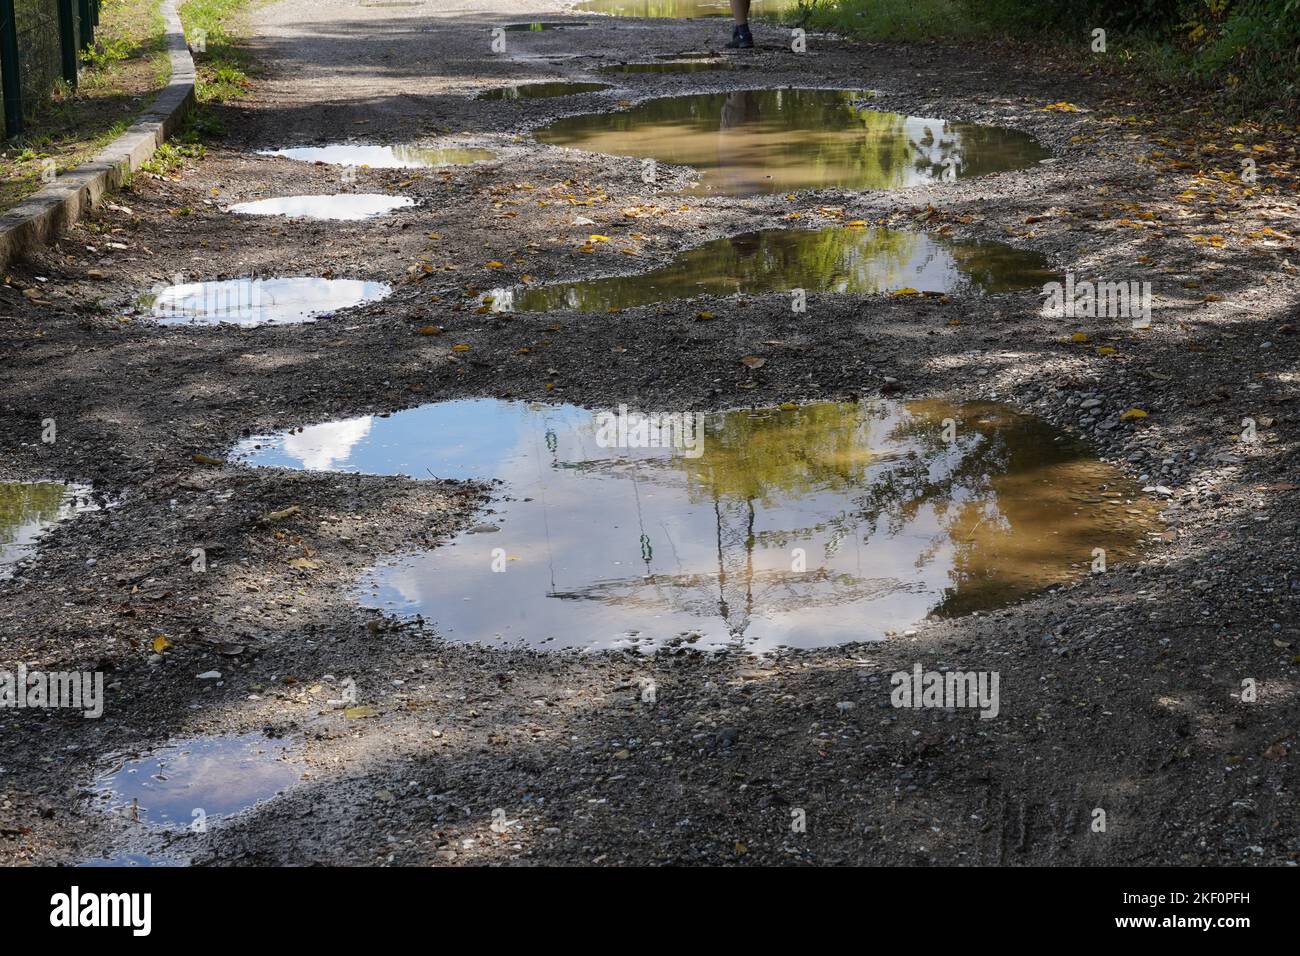 Dirt road with potholes and puddles. In the rain water of the puddles there is reflection of an electricity pillar and blue sky with some clouds. Stock Photo